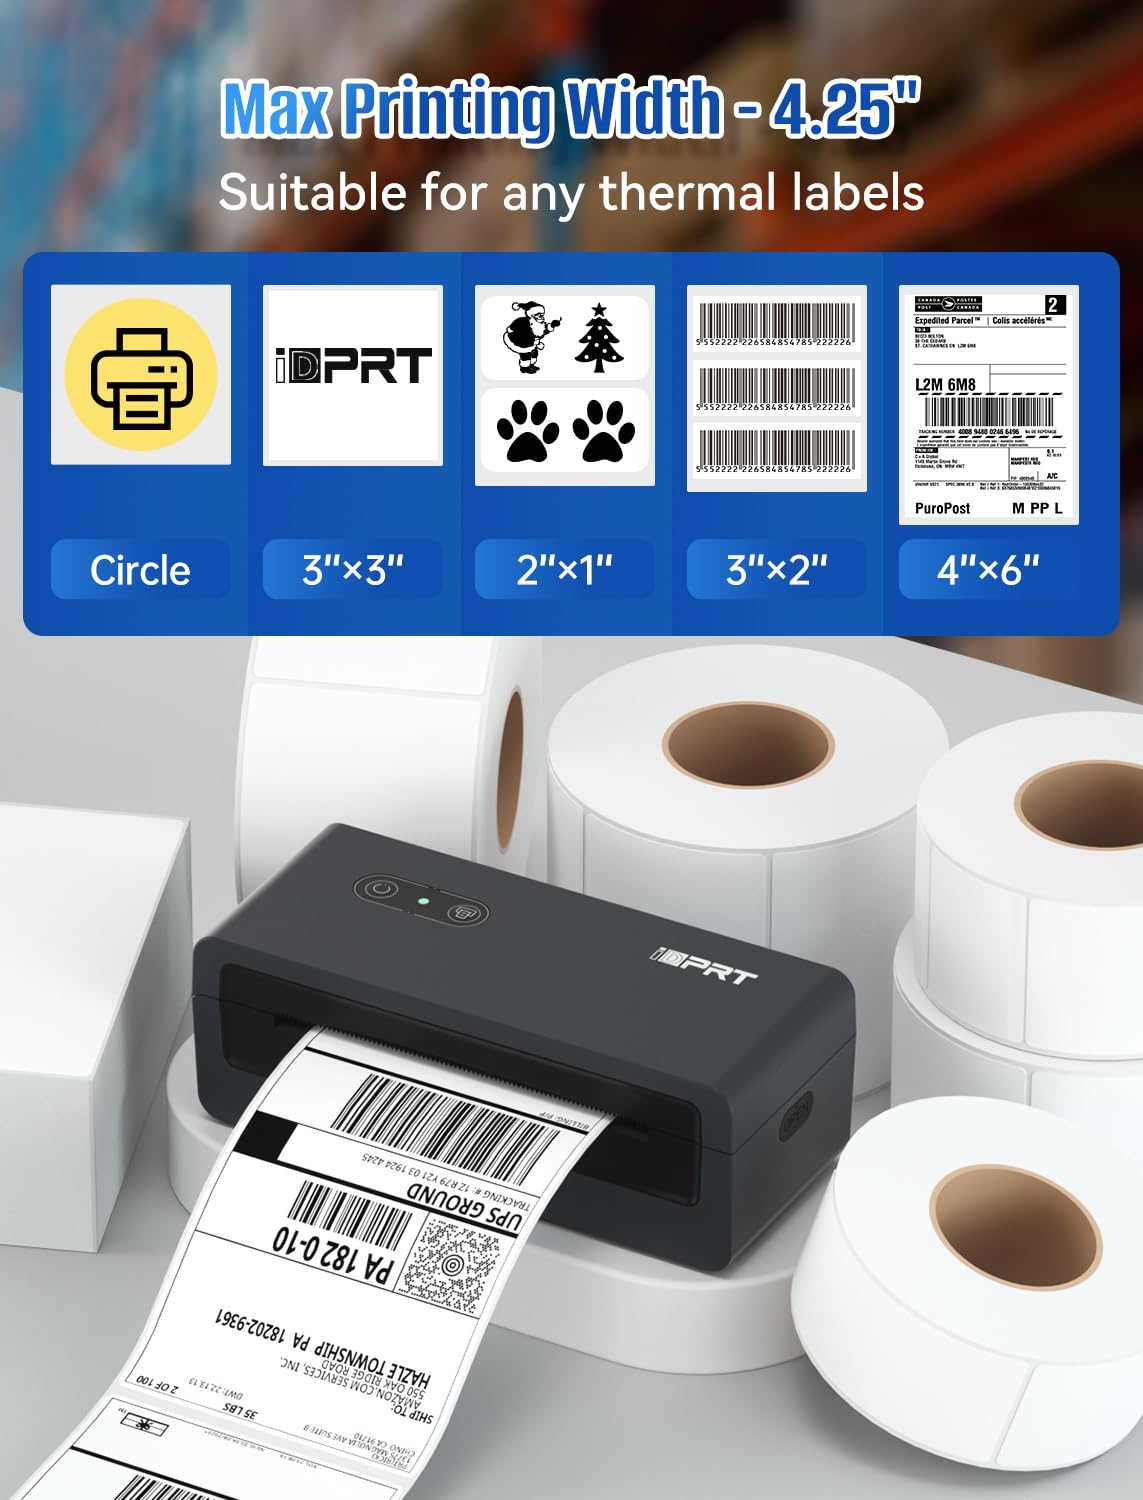 iDPRT Bluetooth Thermal Label Printer for Phone via APP, 4X6 Shipping Label Printer for Small Business and Shipping Package, Support USB for Windows, Mac, Used for Amazon, Shopify, Ebay, UPS, USPS